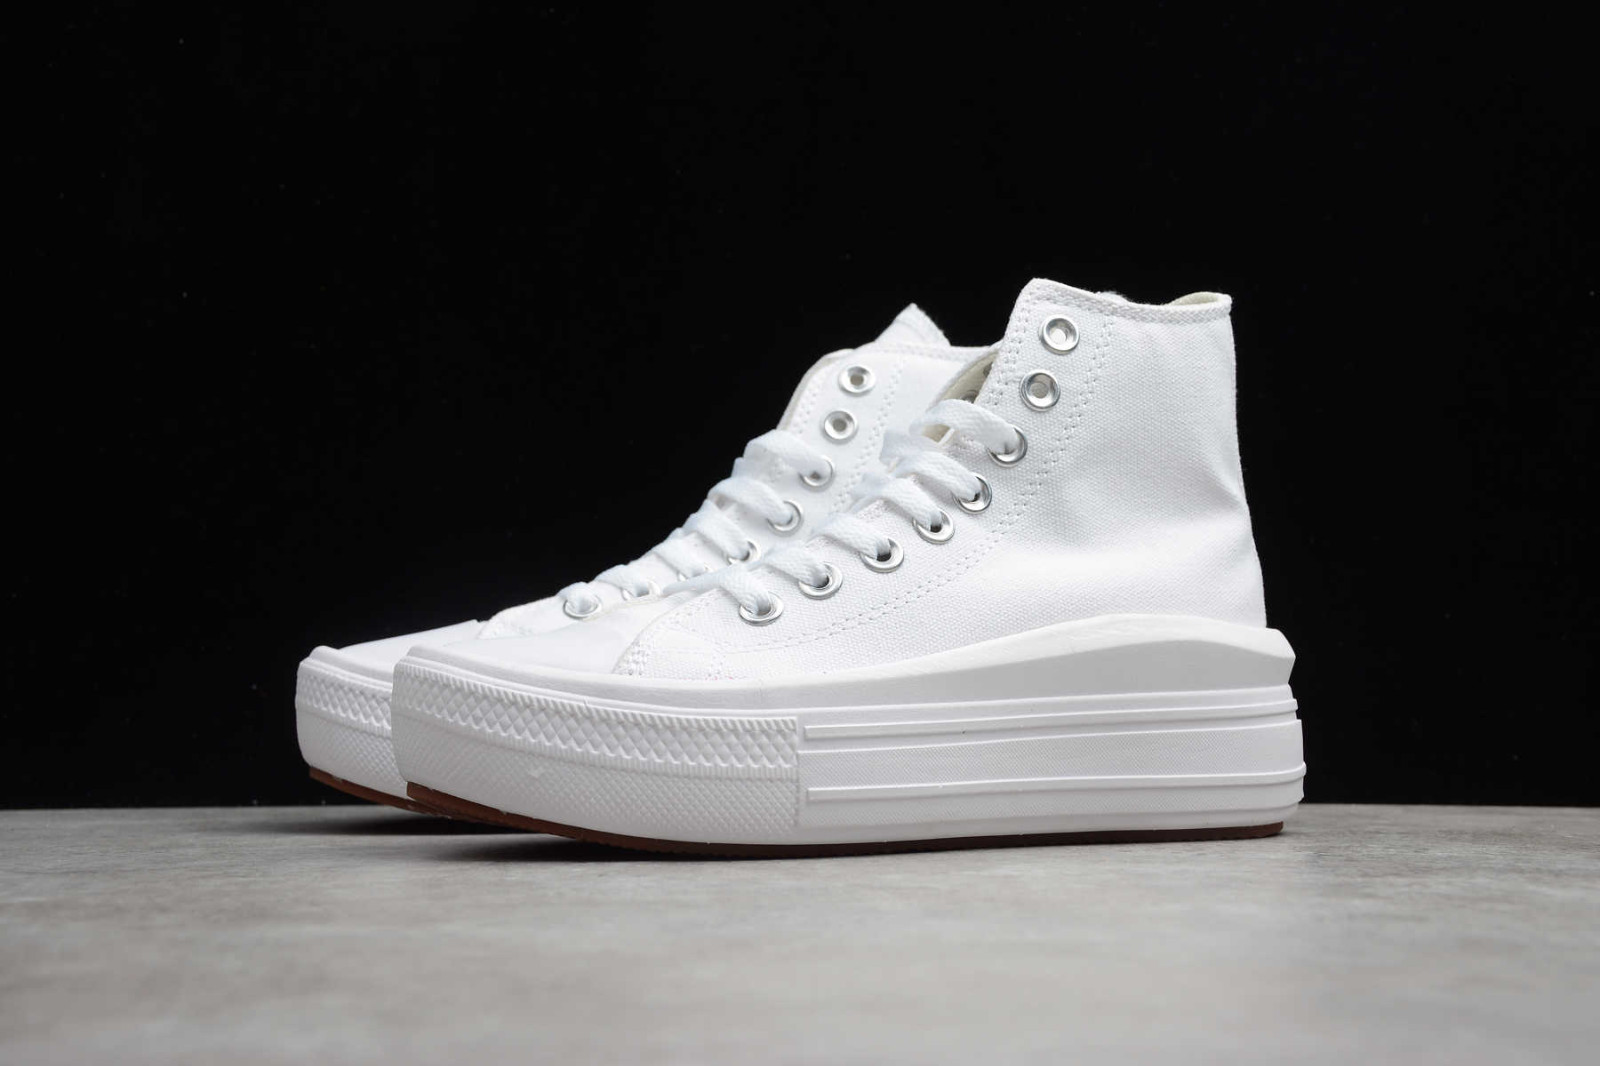 Off-White, Shoes, Converse Chuck Taylor Allstar 7s Hi Offwhite